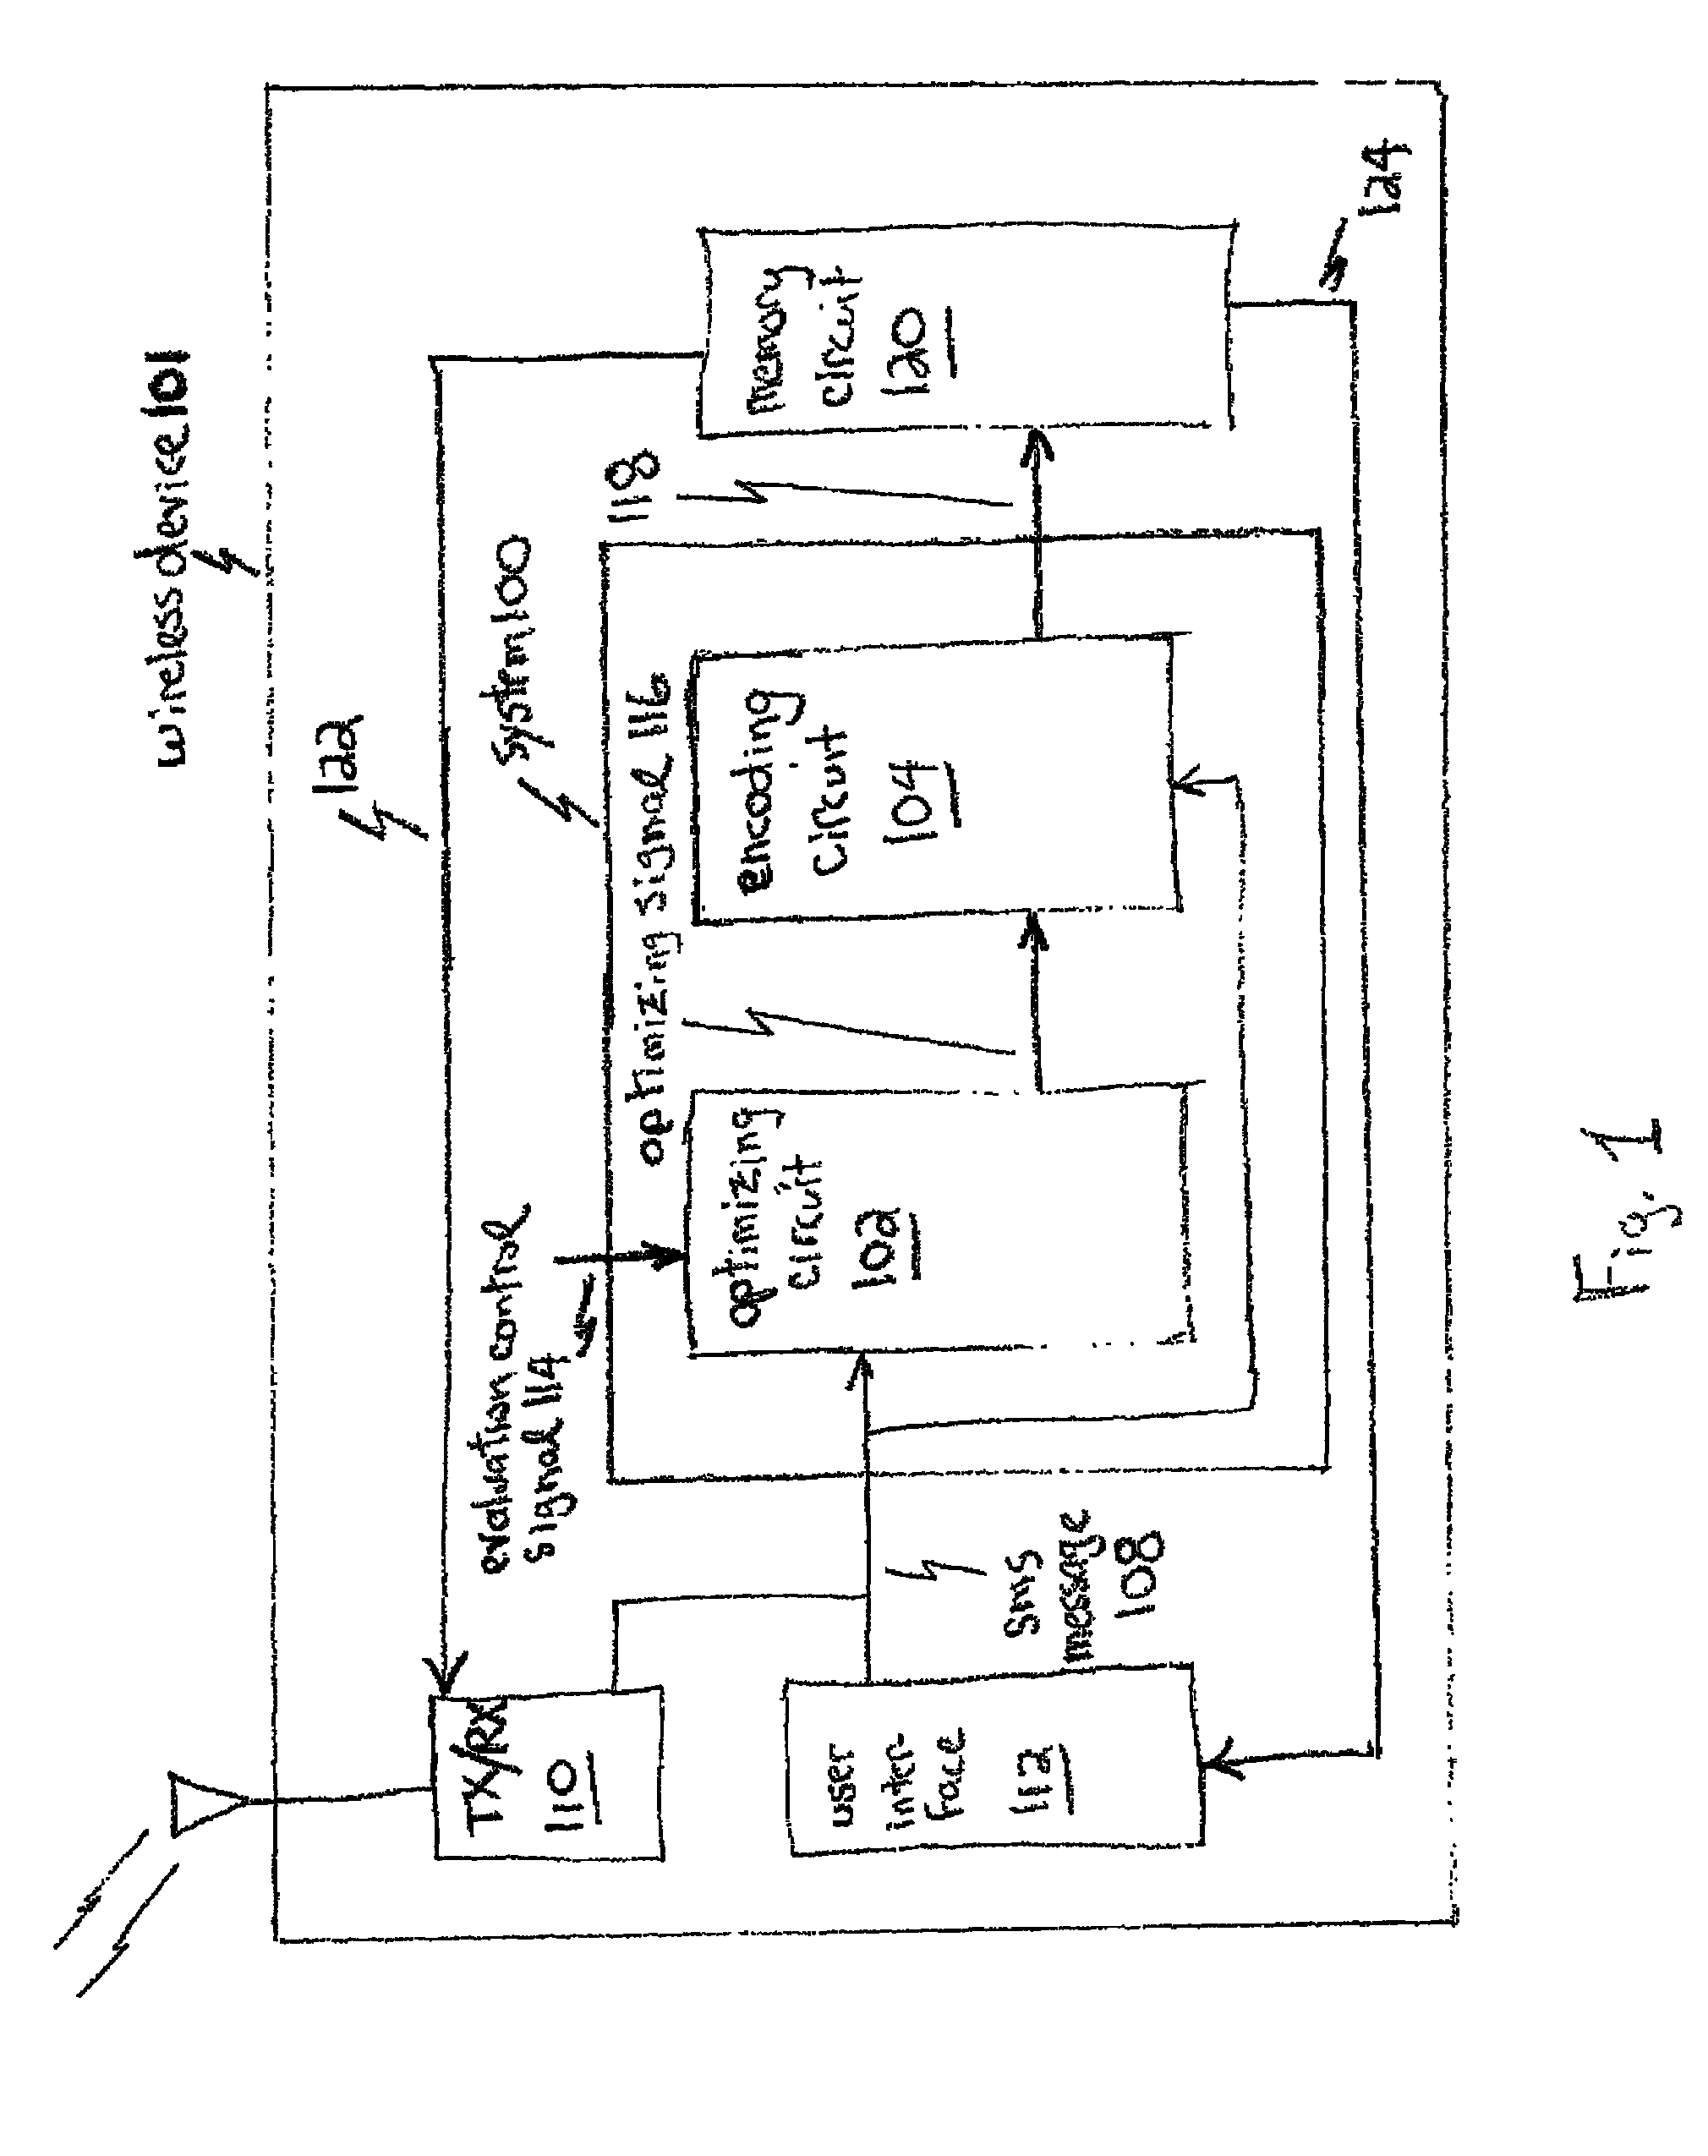 System and method for optimal short message service (SMS) encoding in a wireless communications device